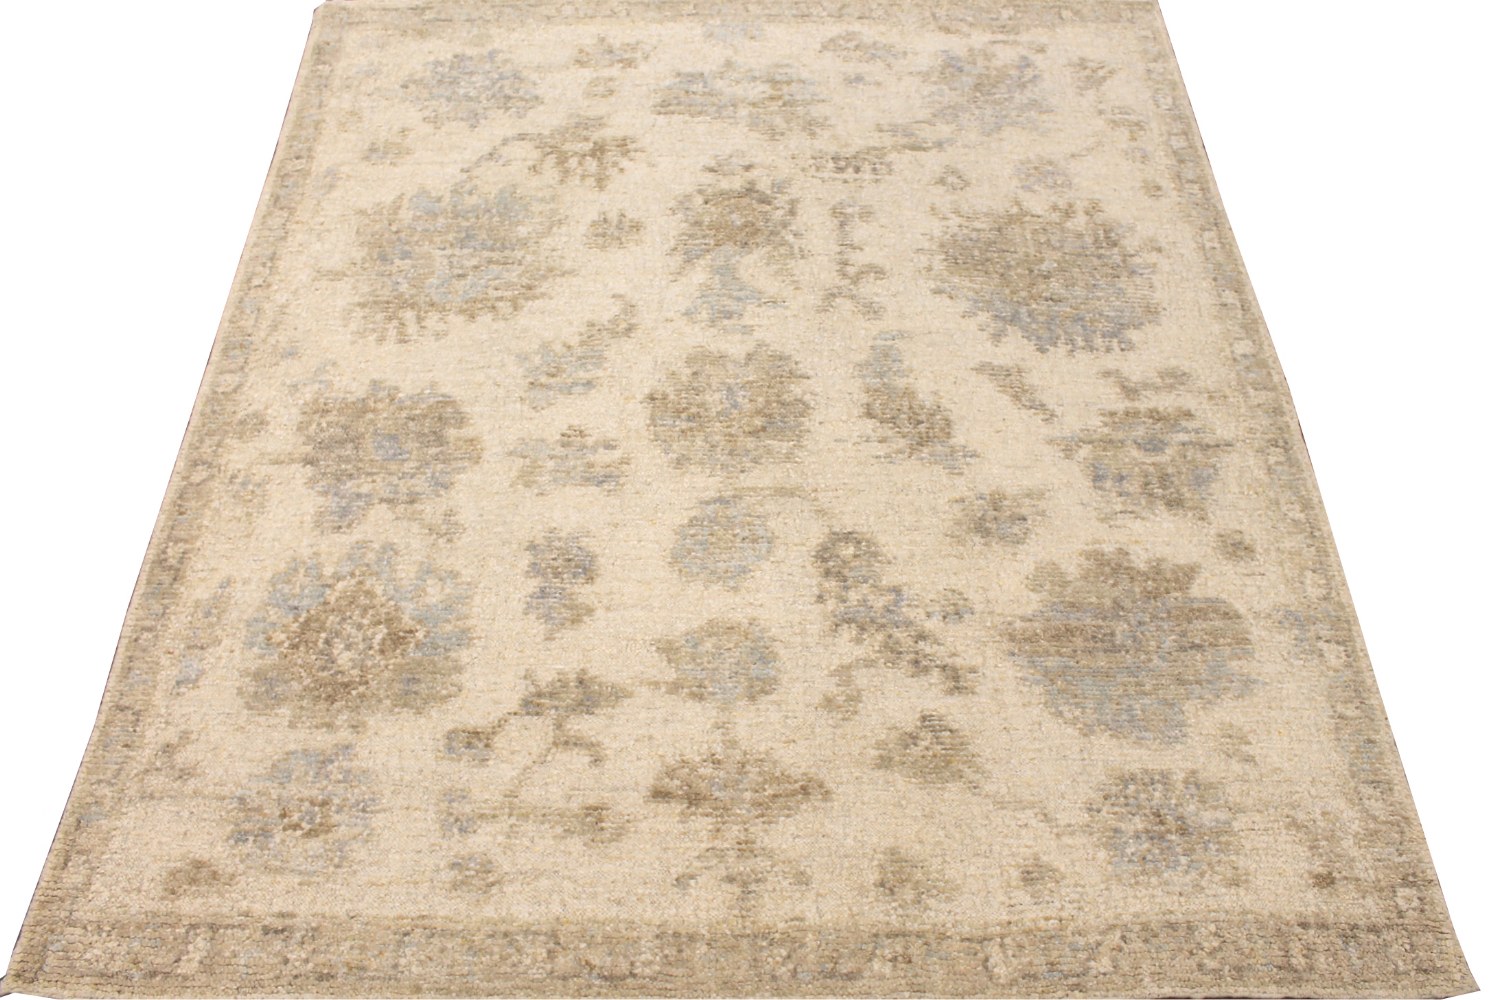 8x10 Oushak Hand Knotted Wool Area Rug - MR028645